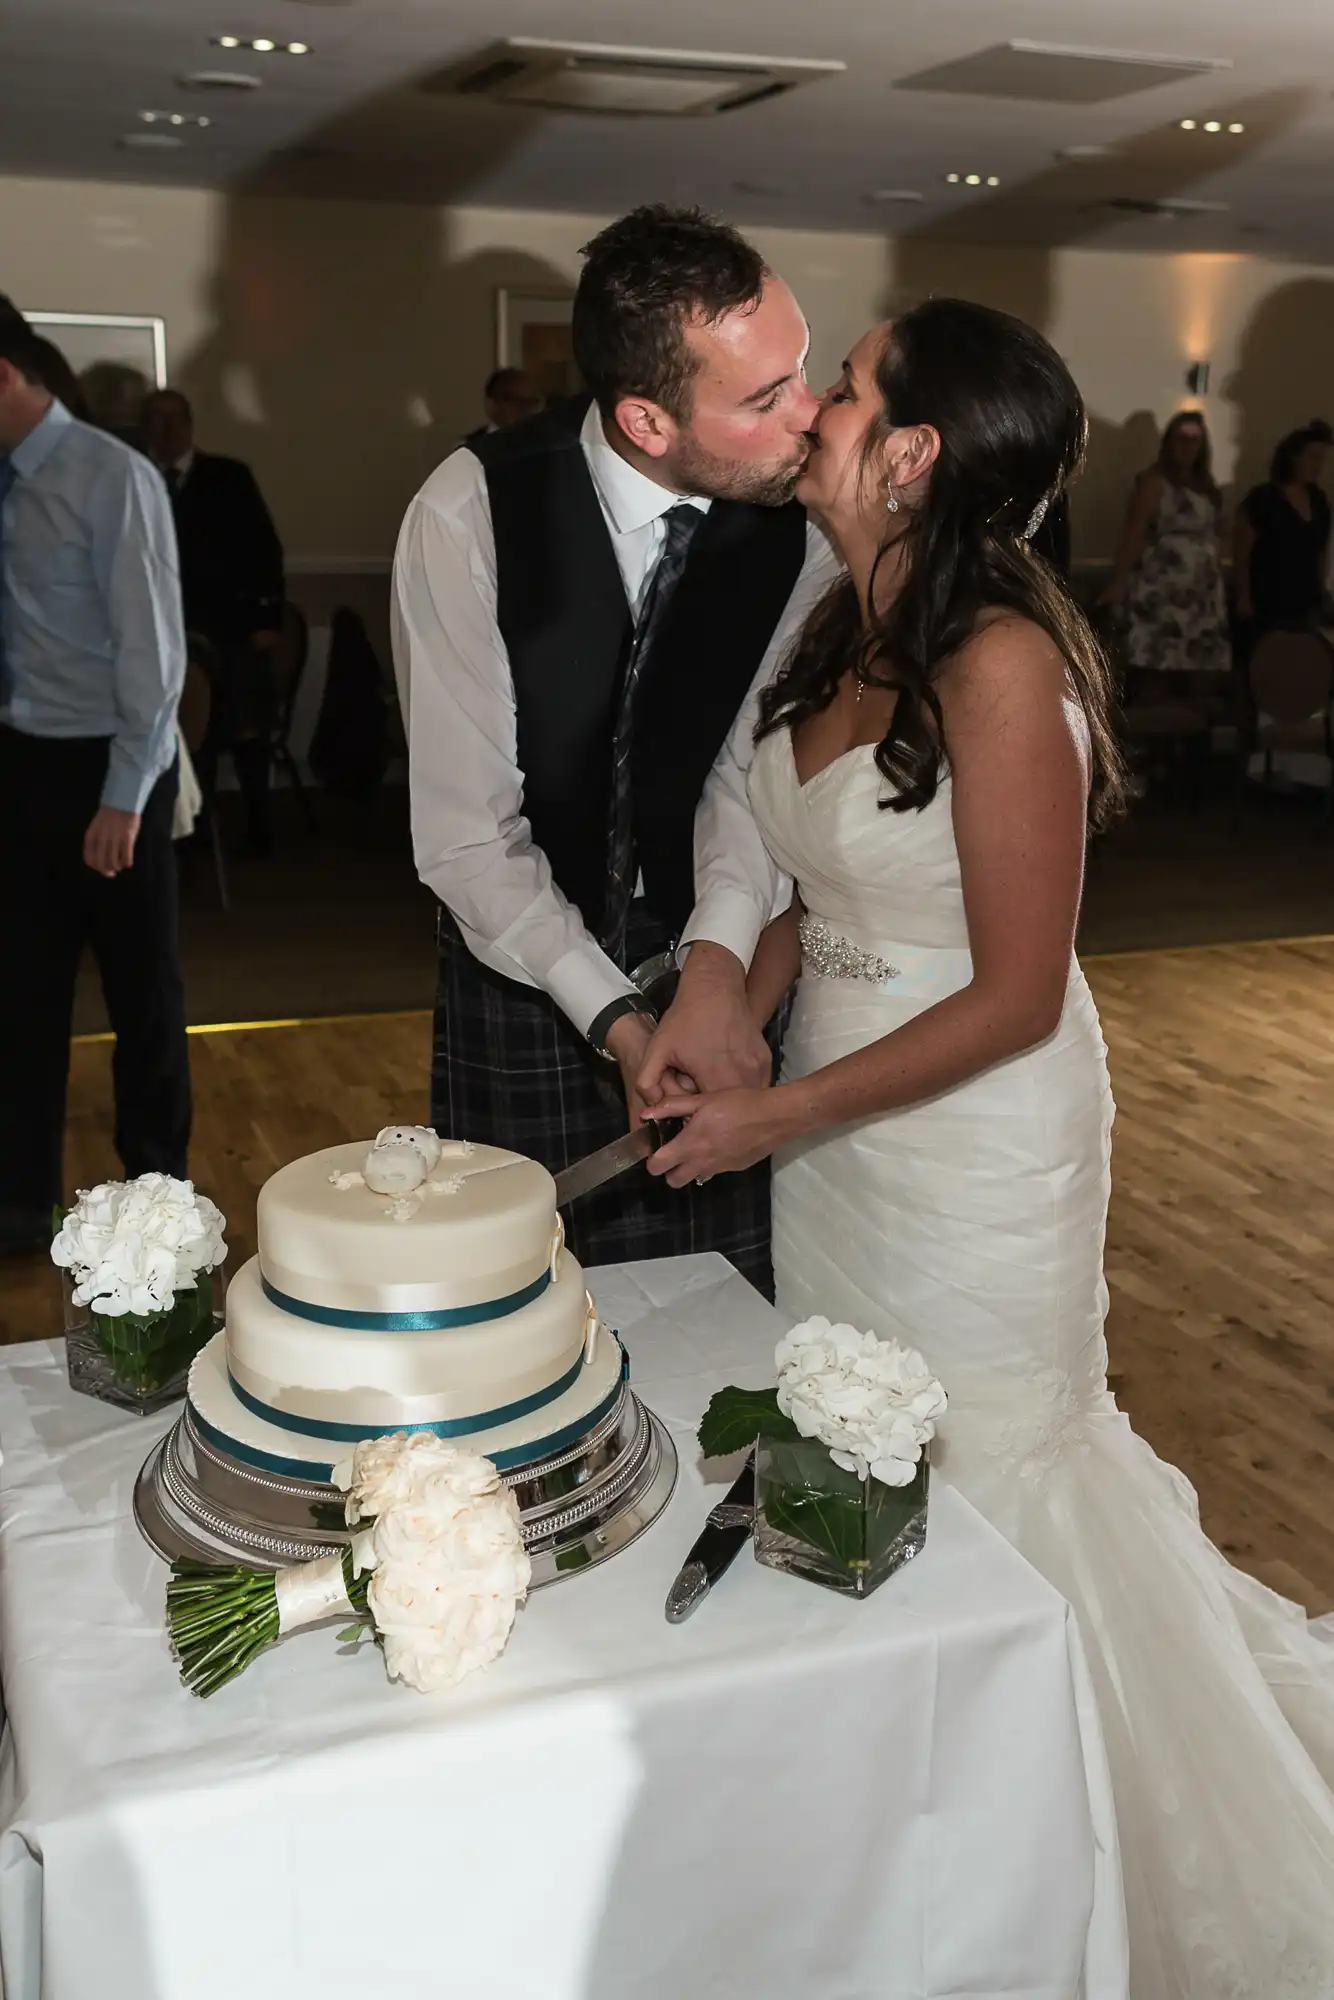 A bride and groom in formal attire kiss while cutting a three-tiered wedding cake at a reception, surrounded by guests.